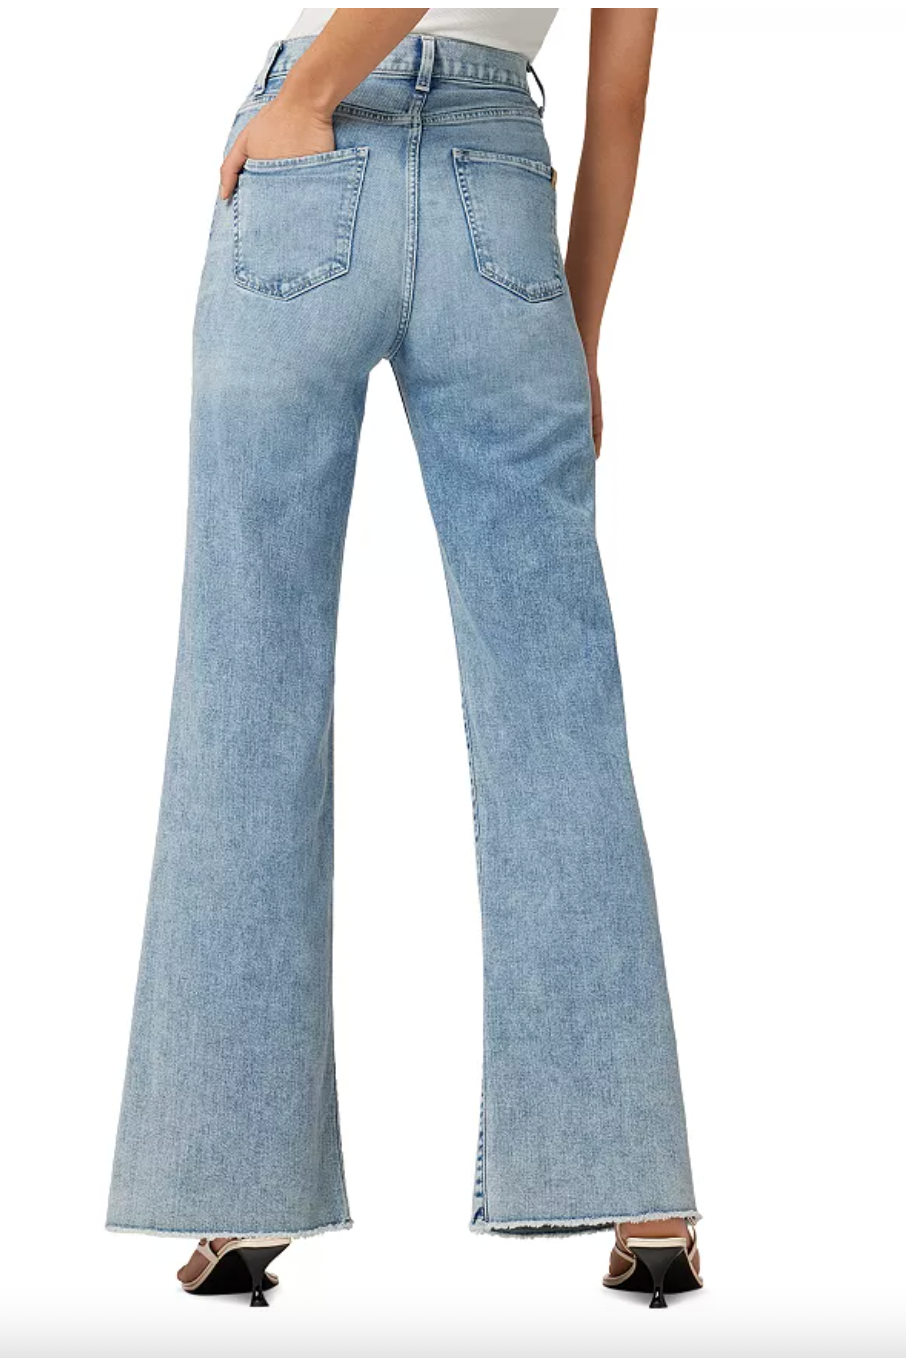 Joe's Jeans The Goldie High Rise Long Wide Leg Jeans in Soulmates